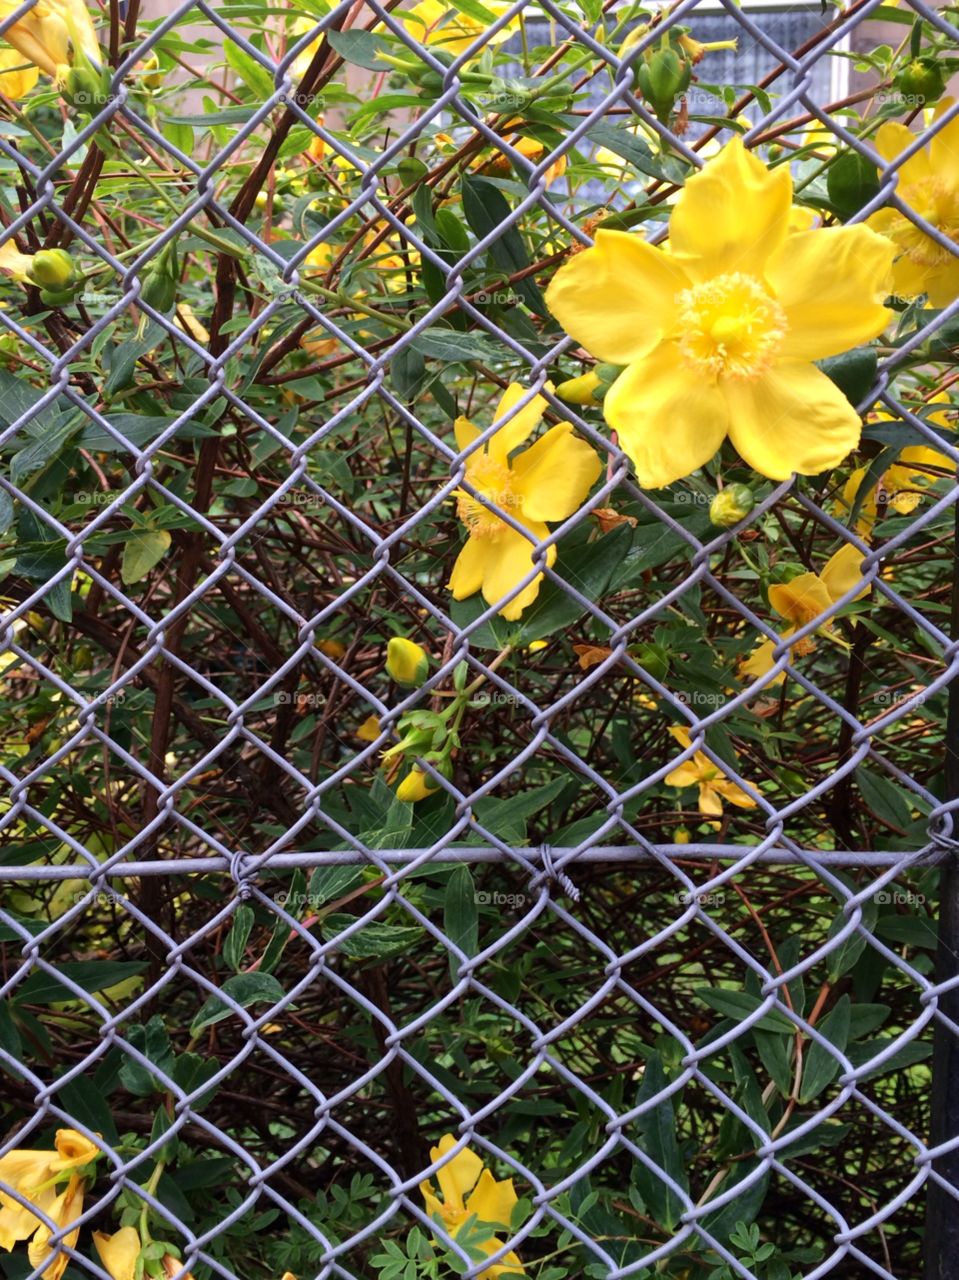 Yellow through the Fence. I could have walked straight past this, as it's fairly commonplace, but something drew me to it. Glad I stopped! 